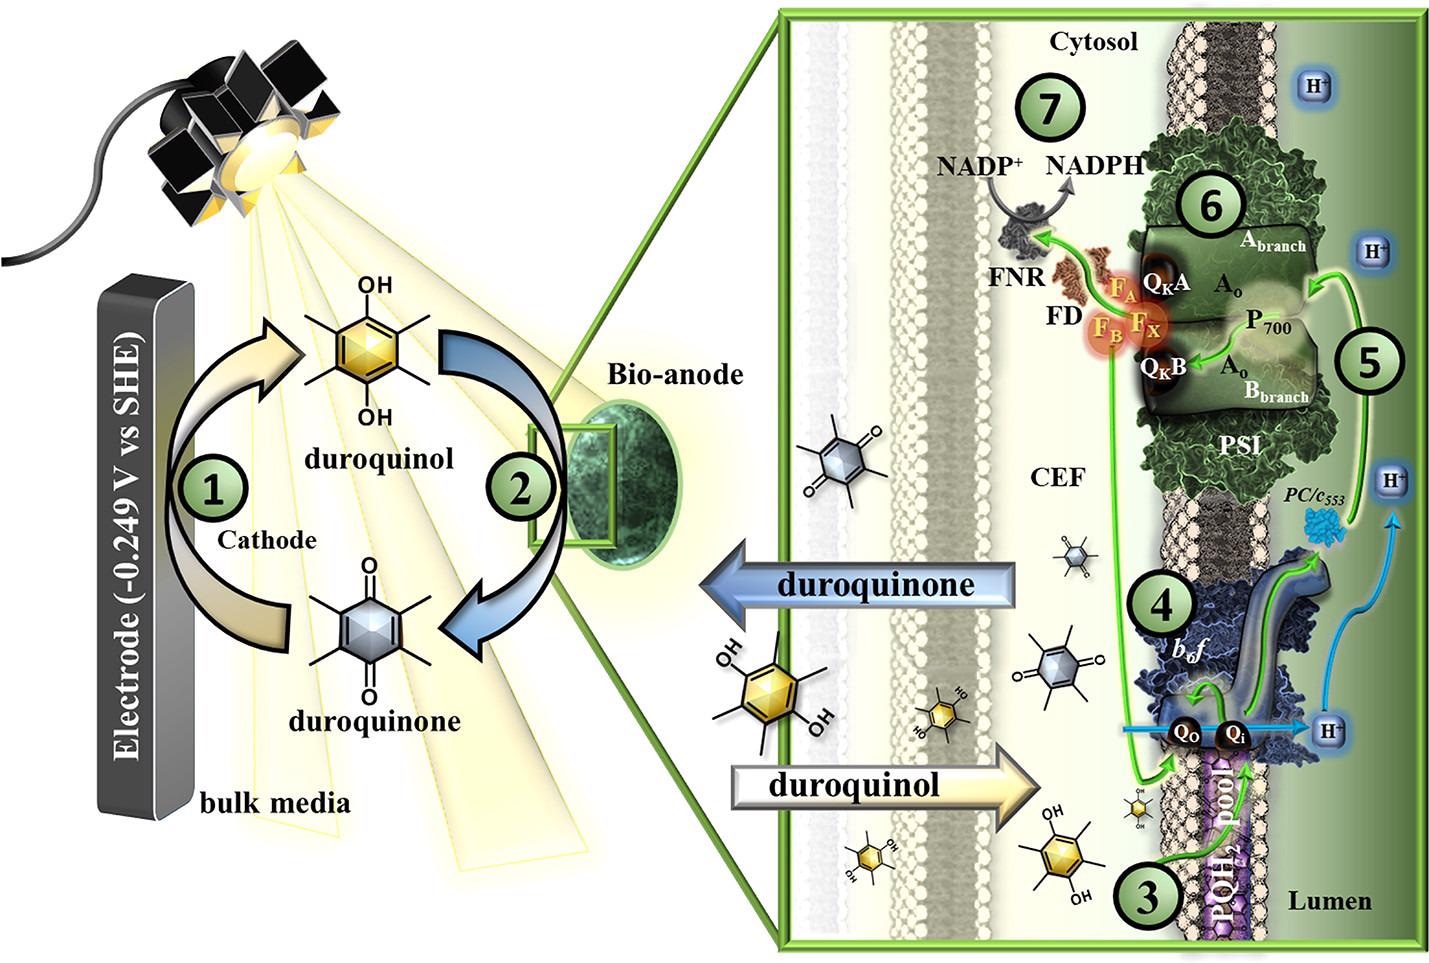 Schematic of the microbial electro-photosynthetic system (MEPS) with green arrows representing electron flow and blue arrows representing proton movement. (1) Molecular mediator (duroquinone to duroquinol) reduction at the cathode -0.249 V vs SHE). (2) Live ?psbB cells act as bioanodes where the oxidation of the mediator occurs. (3) Within the cells, at the interface of the thylakoid membrane, duroquinol mediators donate electrons to (4) the cyt b6f complex, releasing protons into the luminal space and passing electrons further down the chain; (5) cytochrome c553 or plastocyanin then transport the electrons to Photosystem I. (6) Upon exposure to light, PSI catalyzes the light-driven electron transfer from P700 to the cytoplasmic site of the membrane where it reduces (7) ferredoxin (FD) that shuttles electrons to FNR for the reduction of NADP+ to NADPH. A proton gradient is generated in the process, which drives ATP synthesis. If NADP+ is not available electrons will be shuttled back into the PETC via cyclic electron flow (CEF) to the cyt b6f complex or may be dissipated via Flv1/Flv3 that reduces enzymes or redox regulation pathways in the cell (for clarity not depicted in figure).